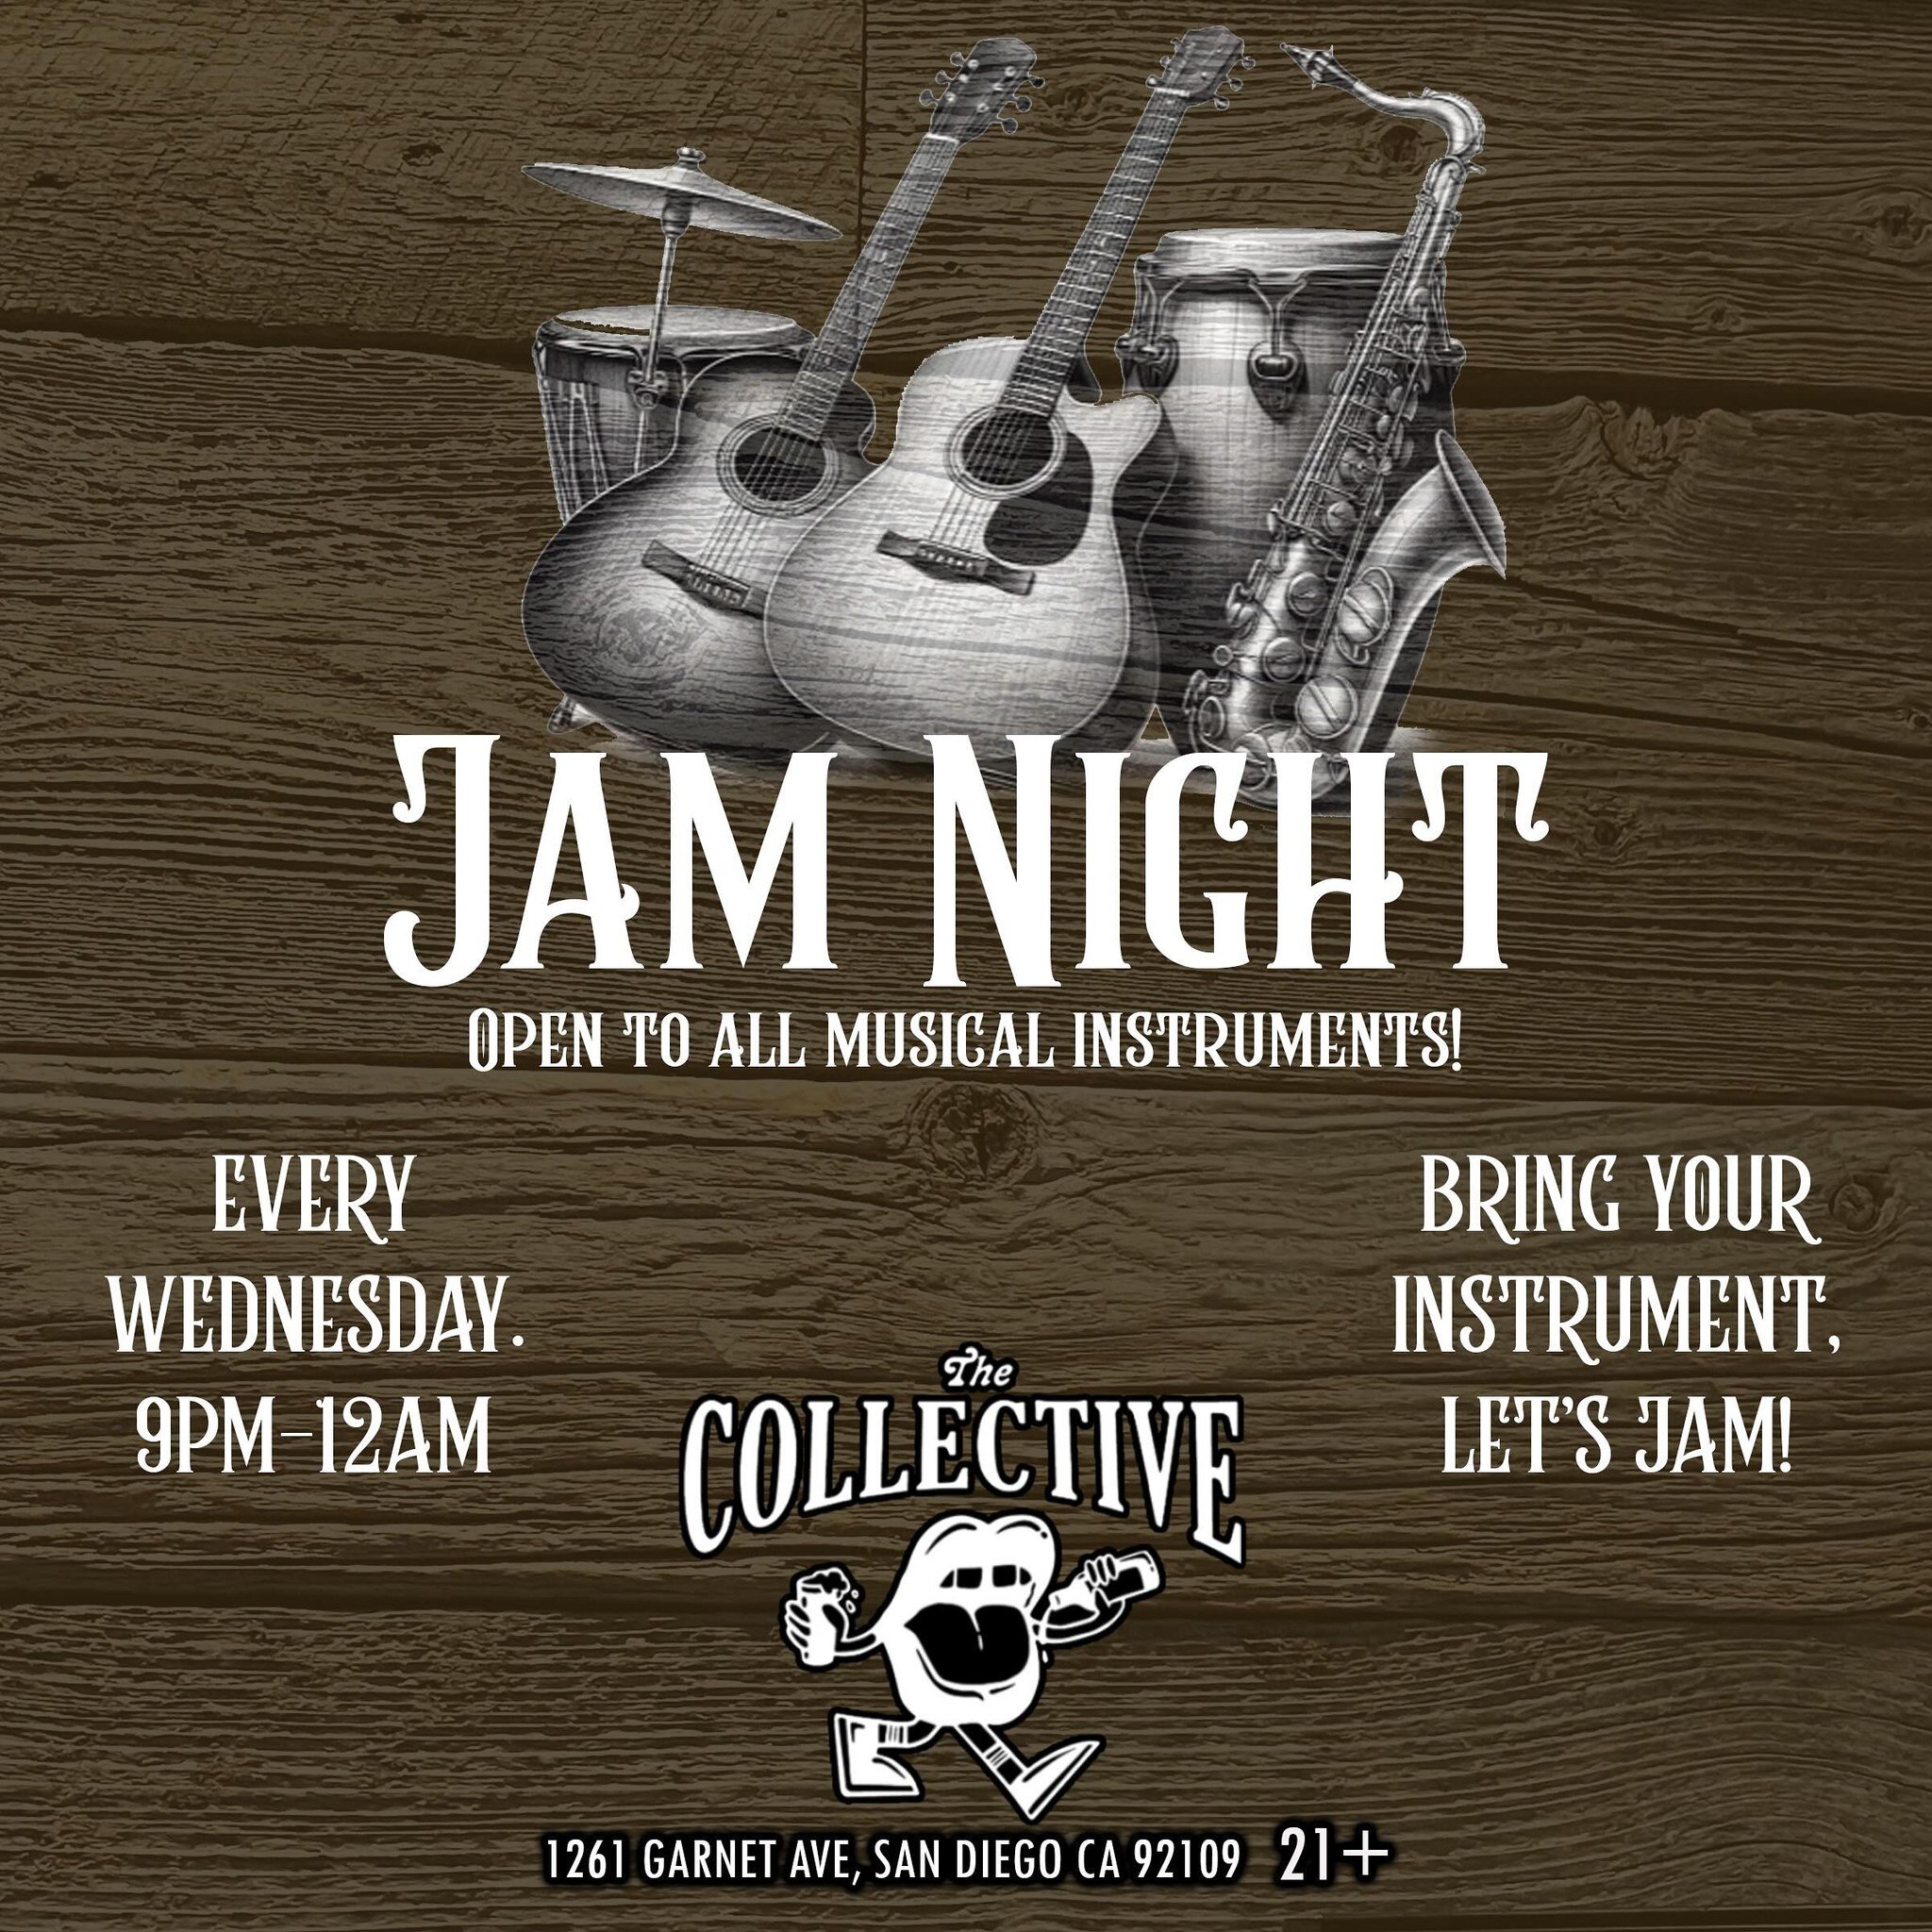 CALLING ALL MUSICIANS!! 🎶 Jam night is happening every Wednesday!! Bring your instruments and jam with others! 

This is not an open mic night. This does not have a strict time slot per musician. We ask that you come, bring your instrument, sign up 